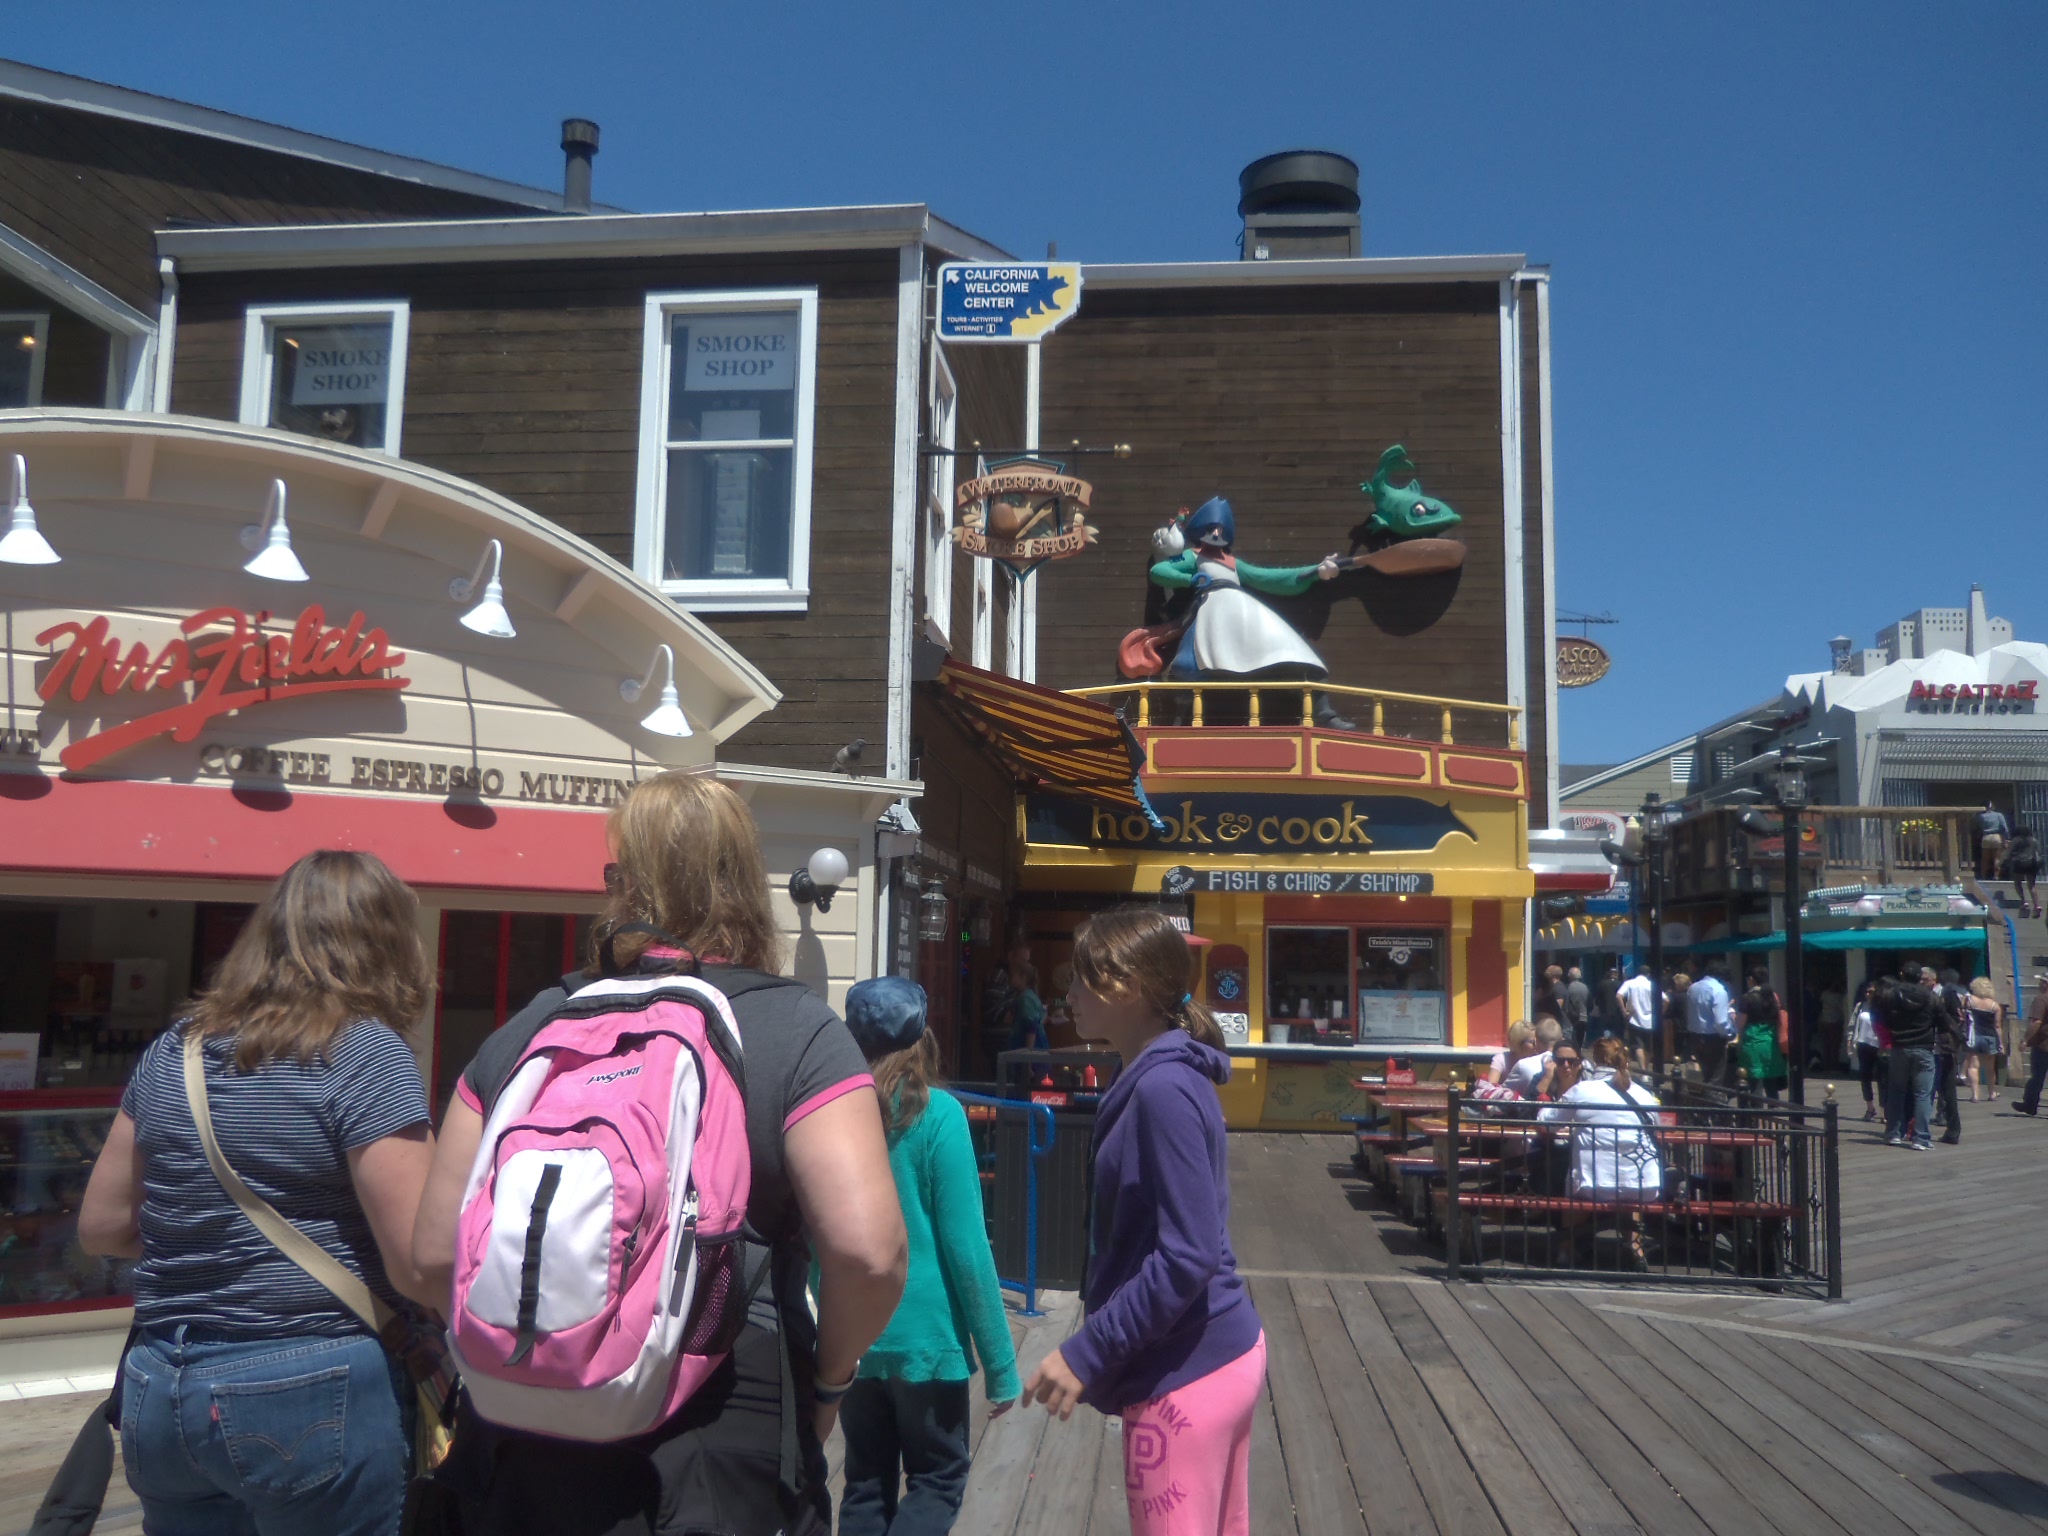 a group of people walking past buildings at a boardwalk